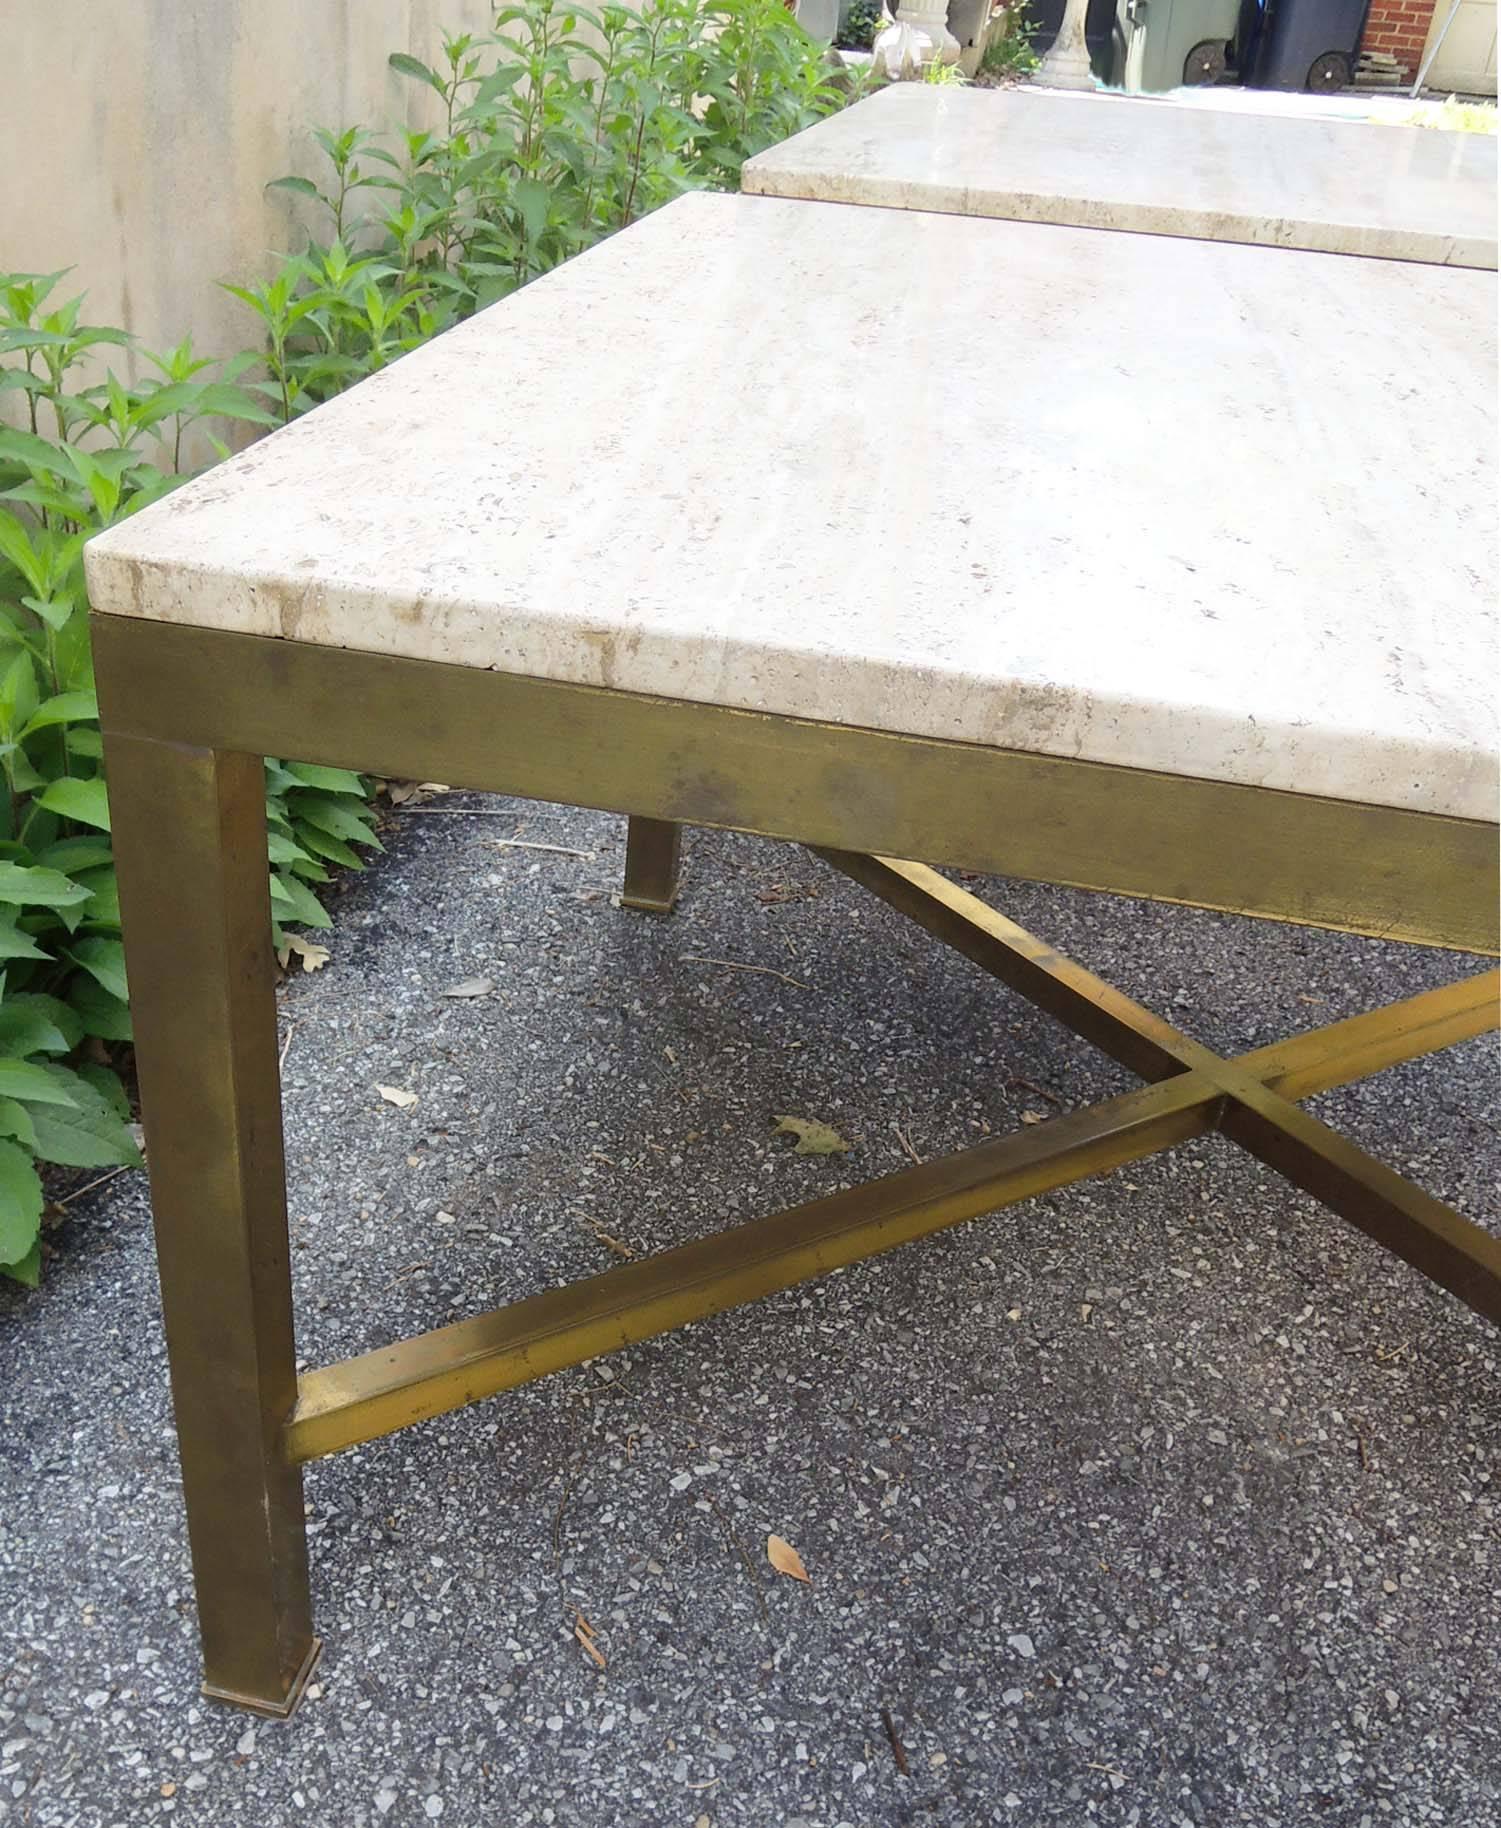 Mid-Century Modern pair of brass side tables with Italian travertine stone tops.